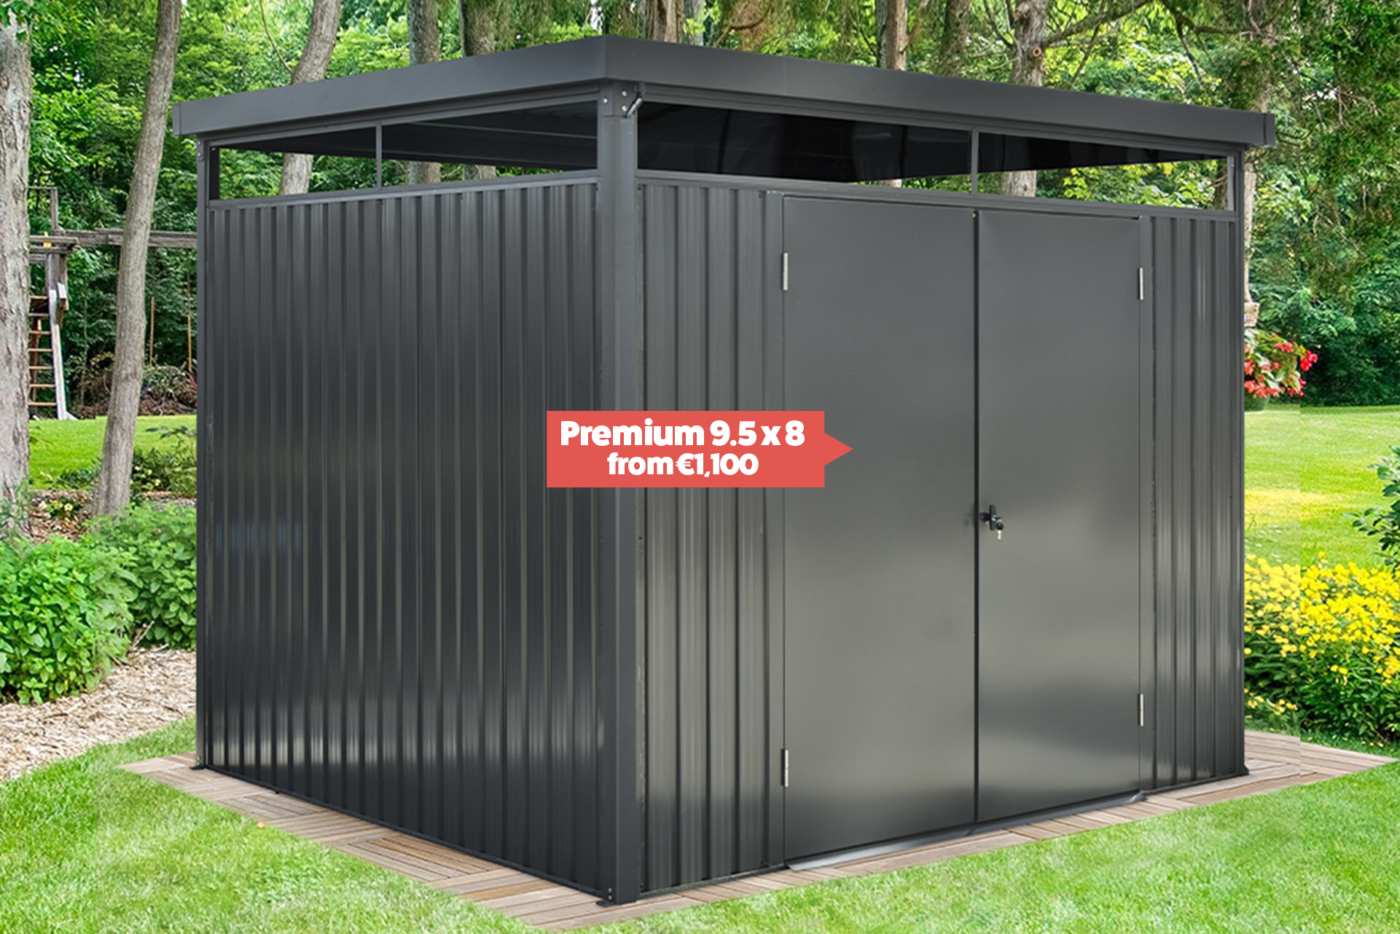 The grey premium panoramic shed. It's square shaped with a full width window under the roof on each side of the shed.